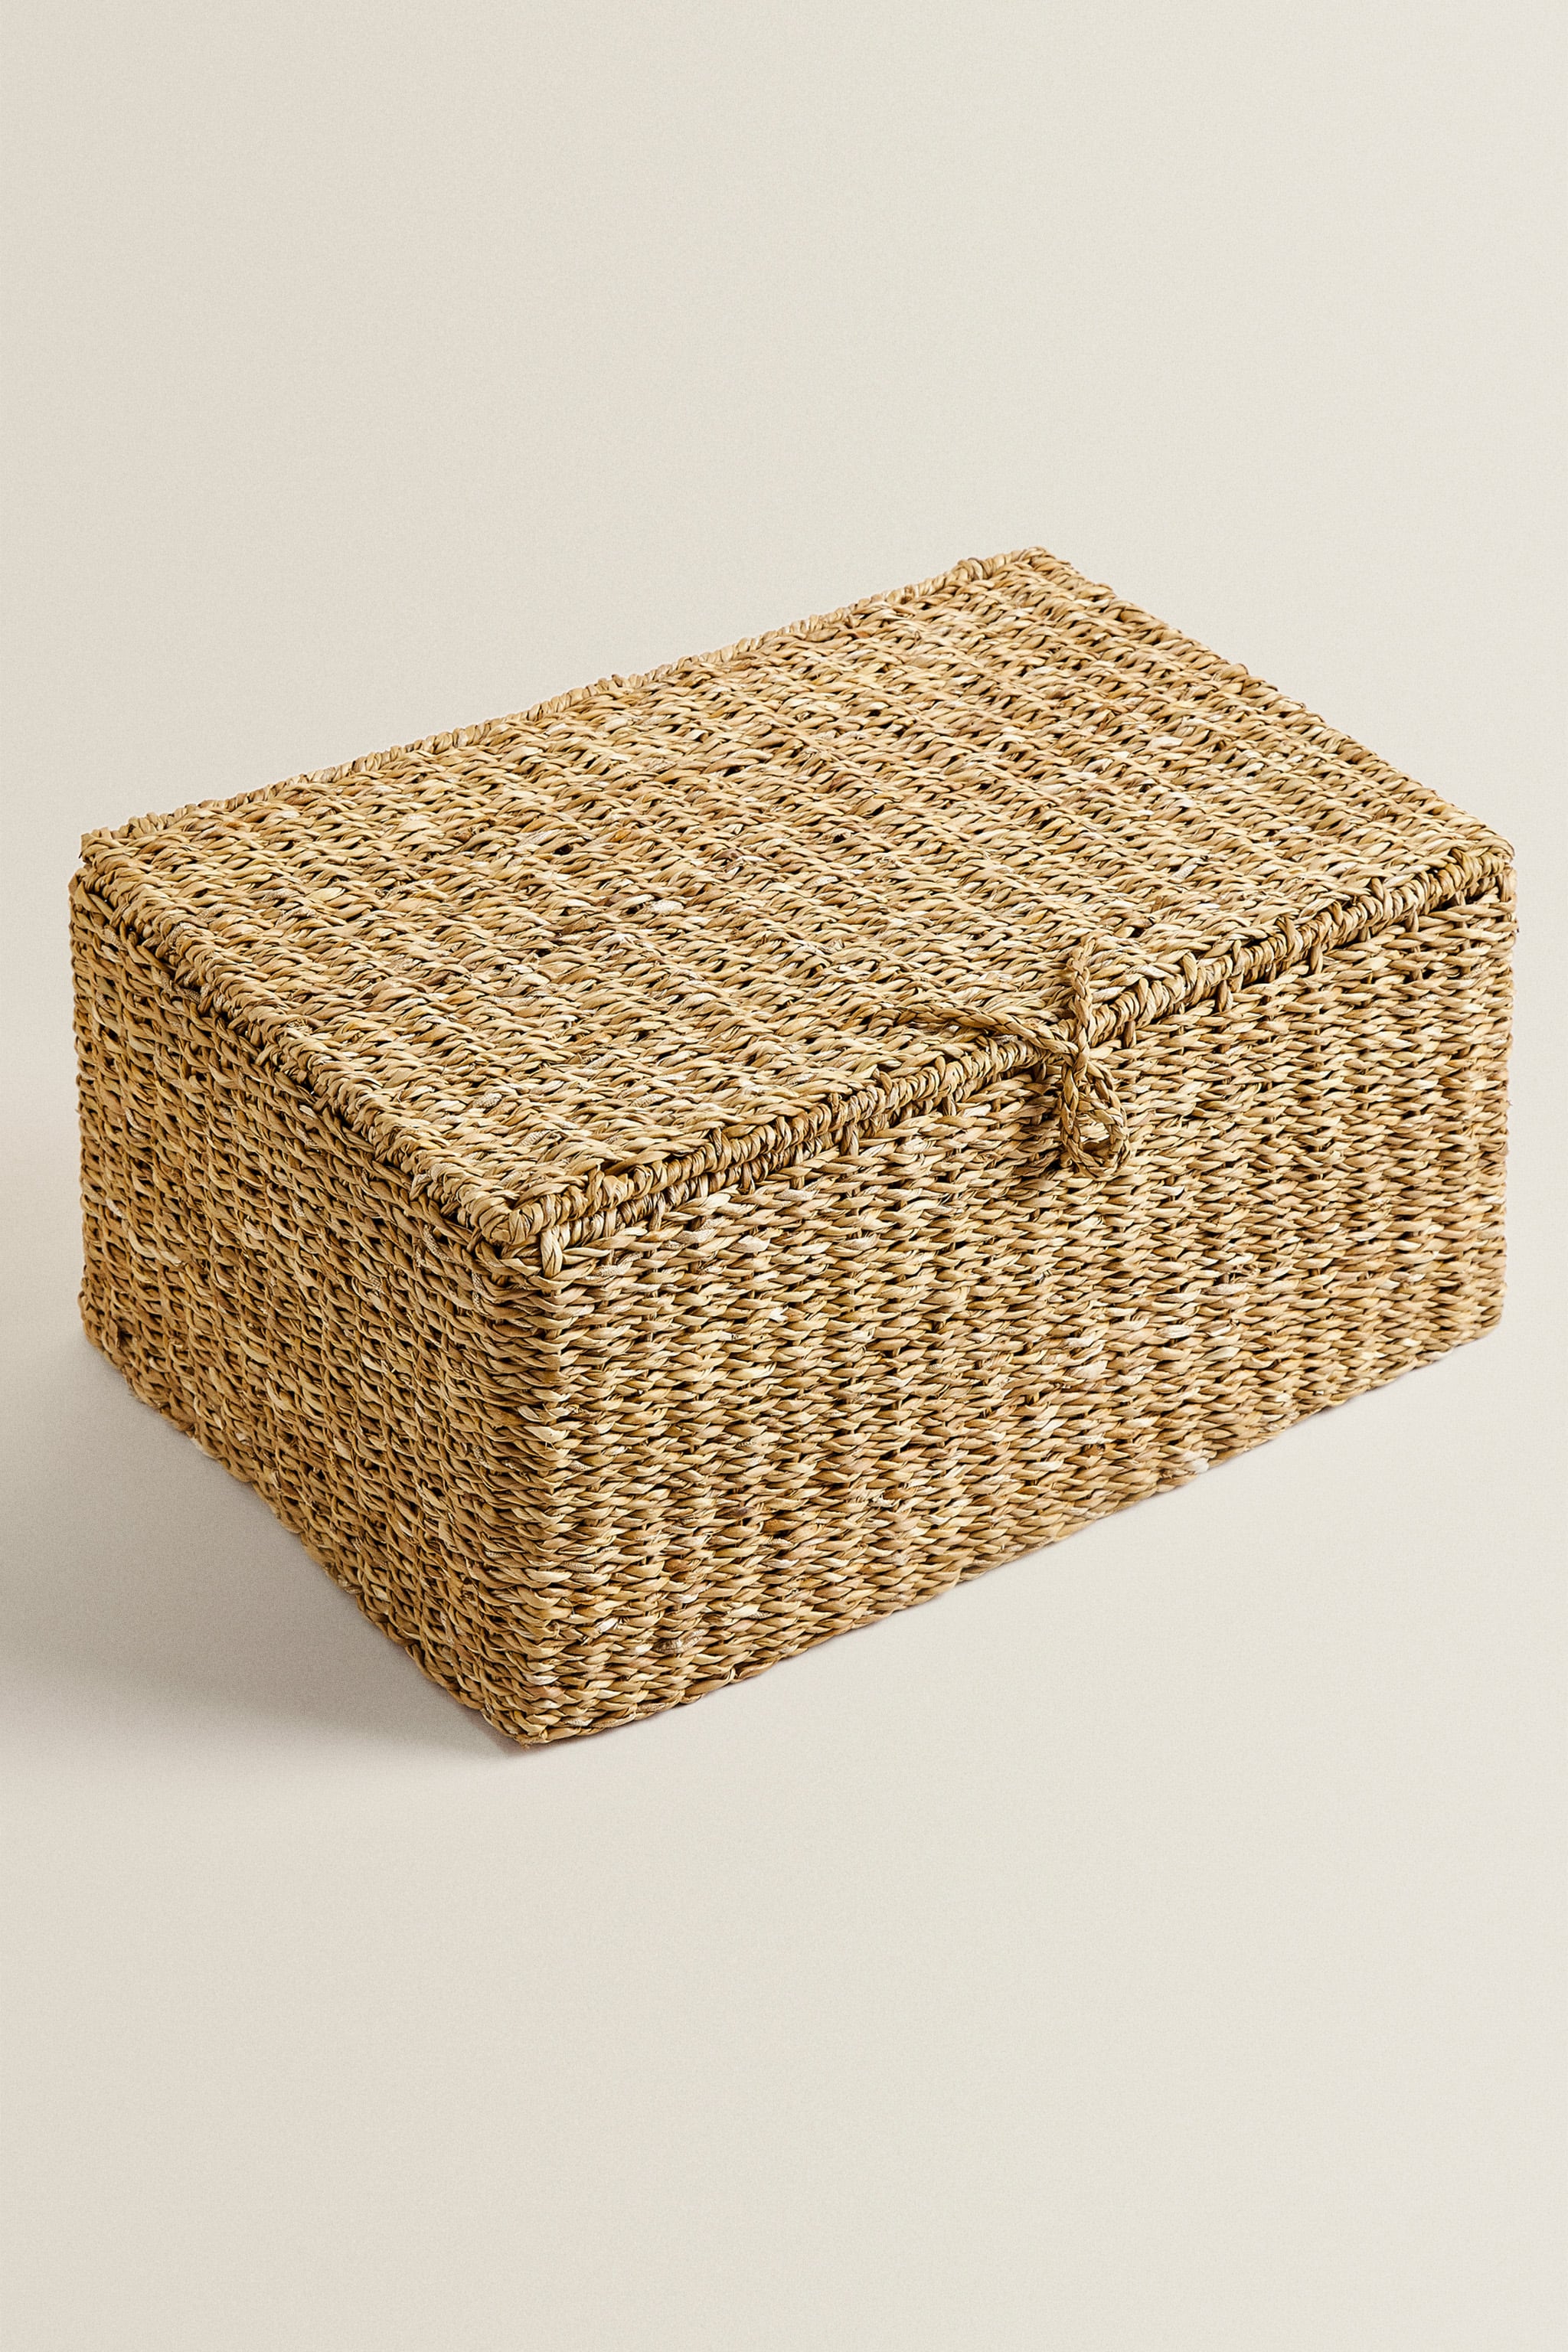 SEAGRASS BASKET WITH LID